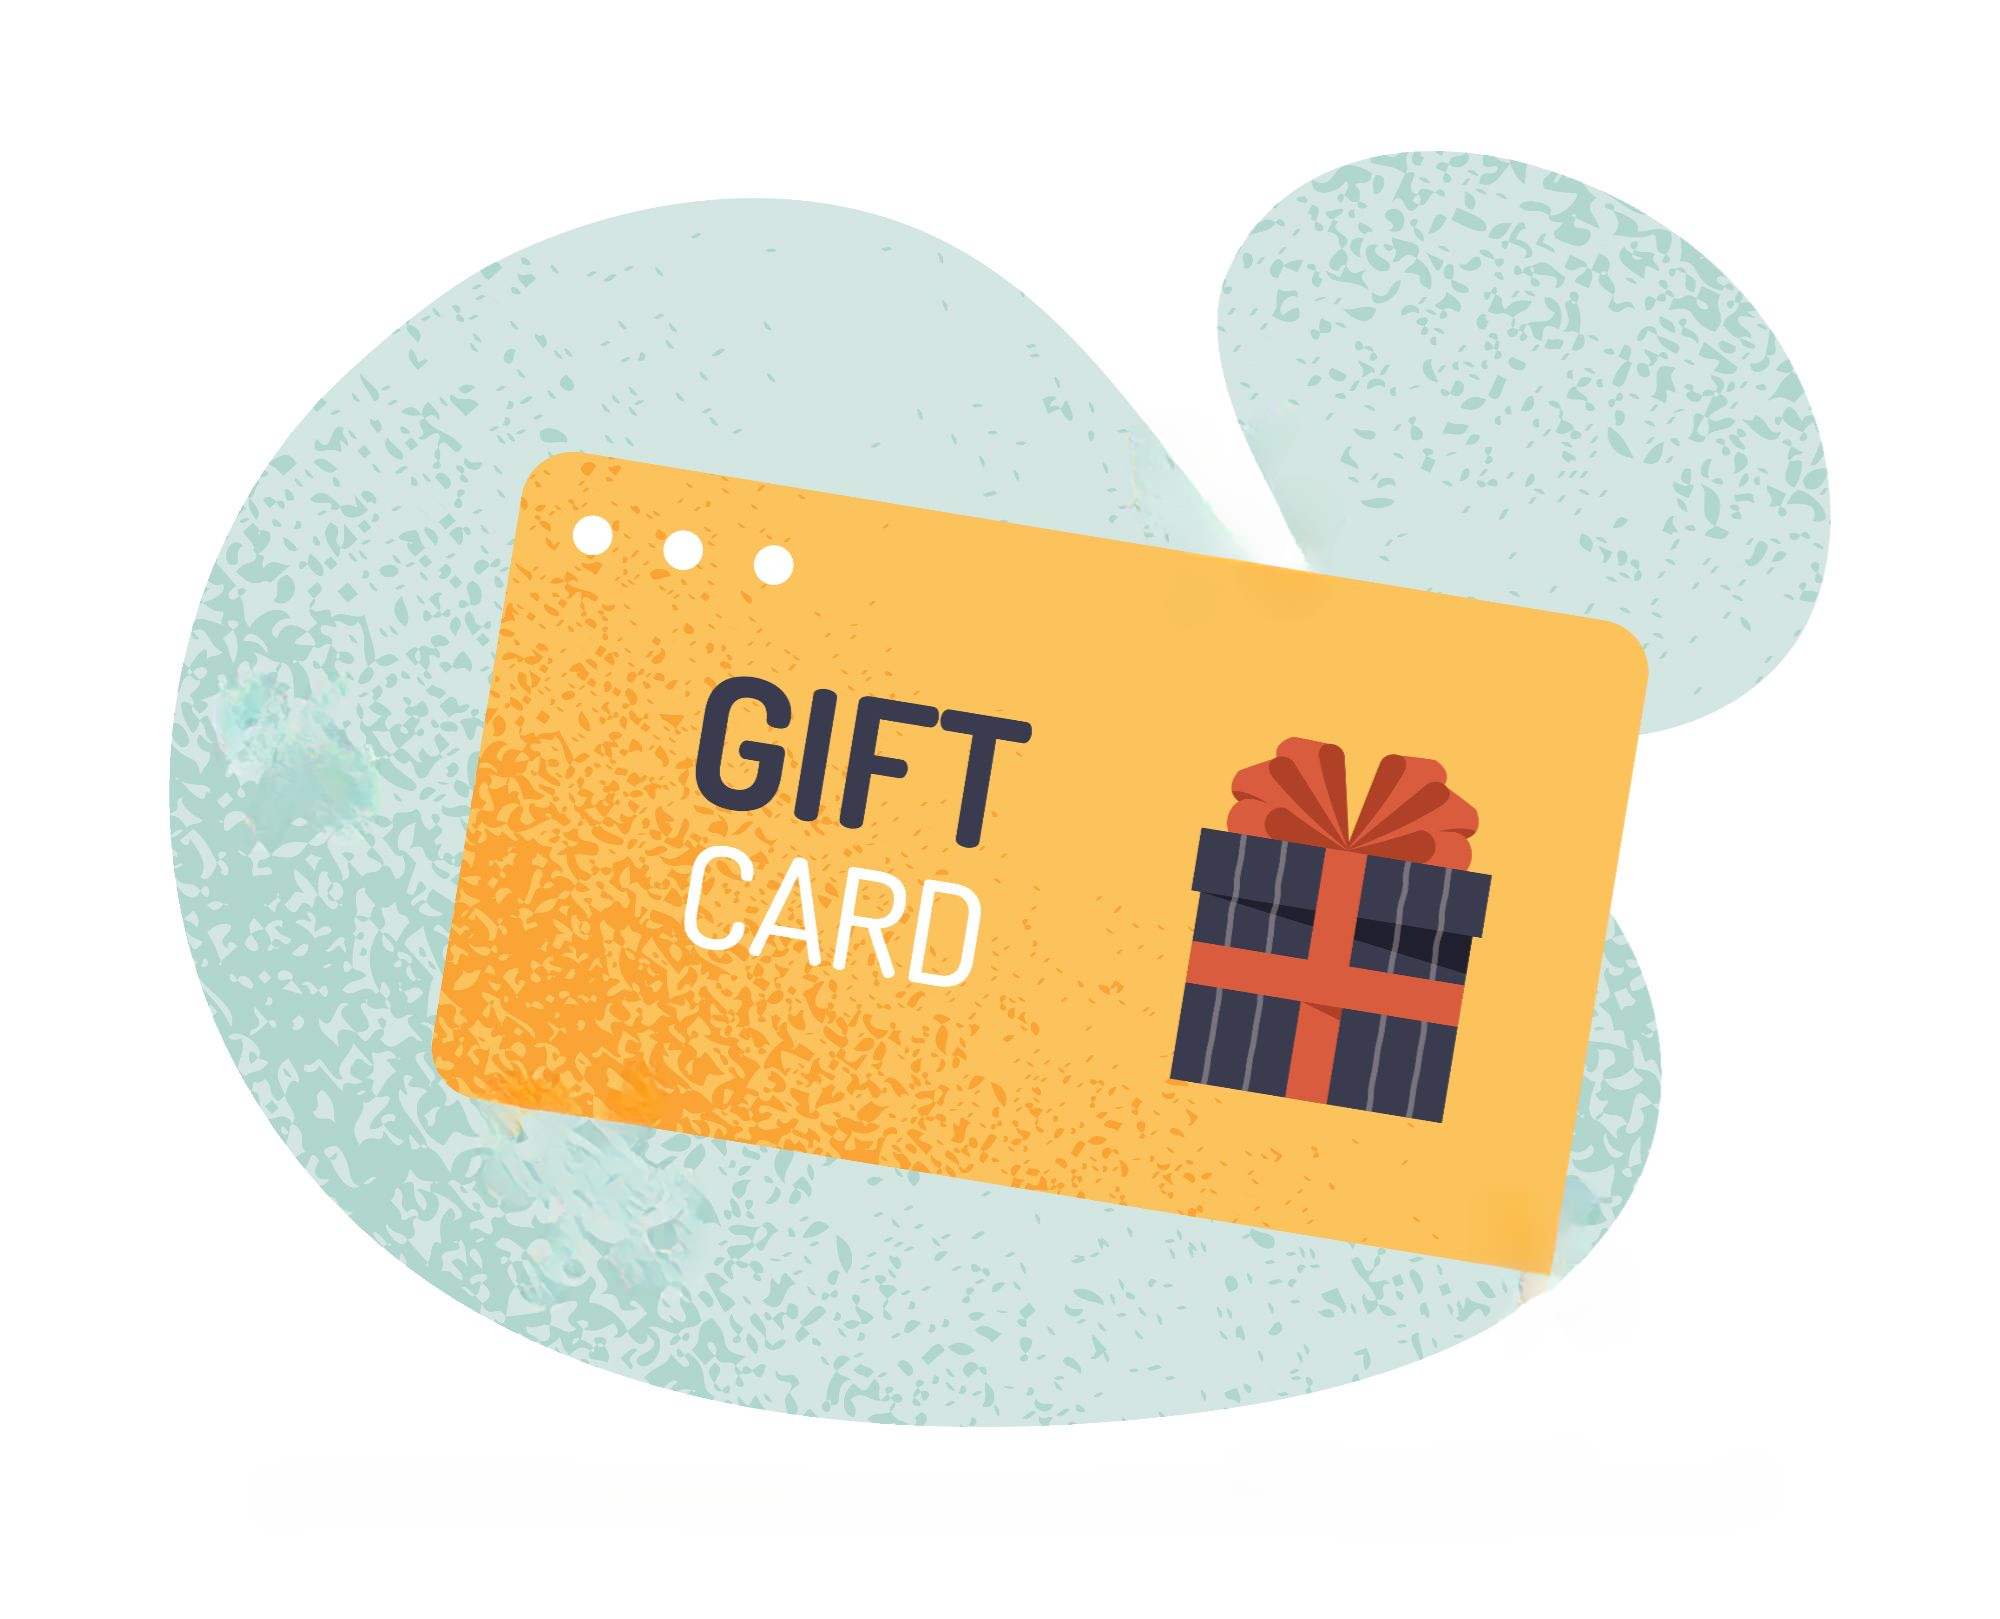 What to know about gift cards